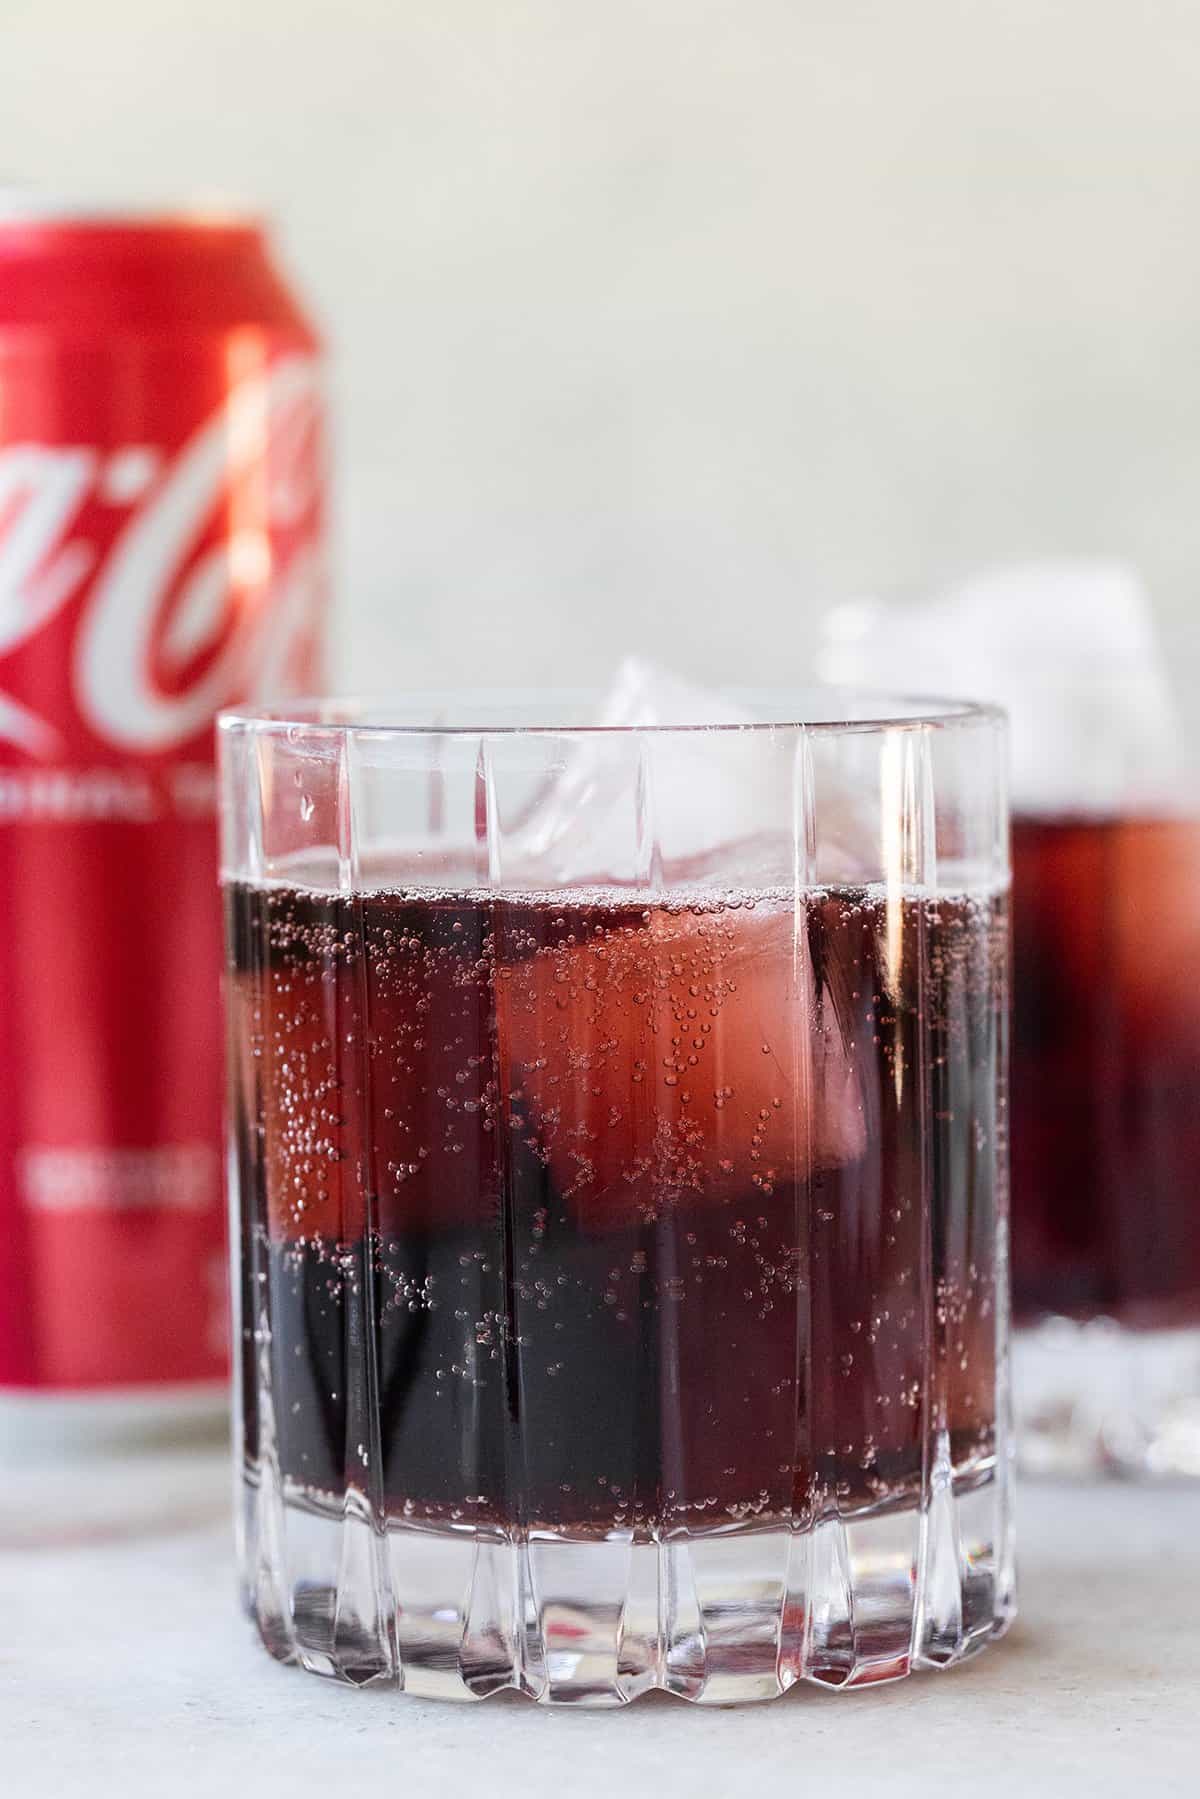  Kalimotxo in a glass with ice